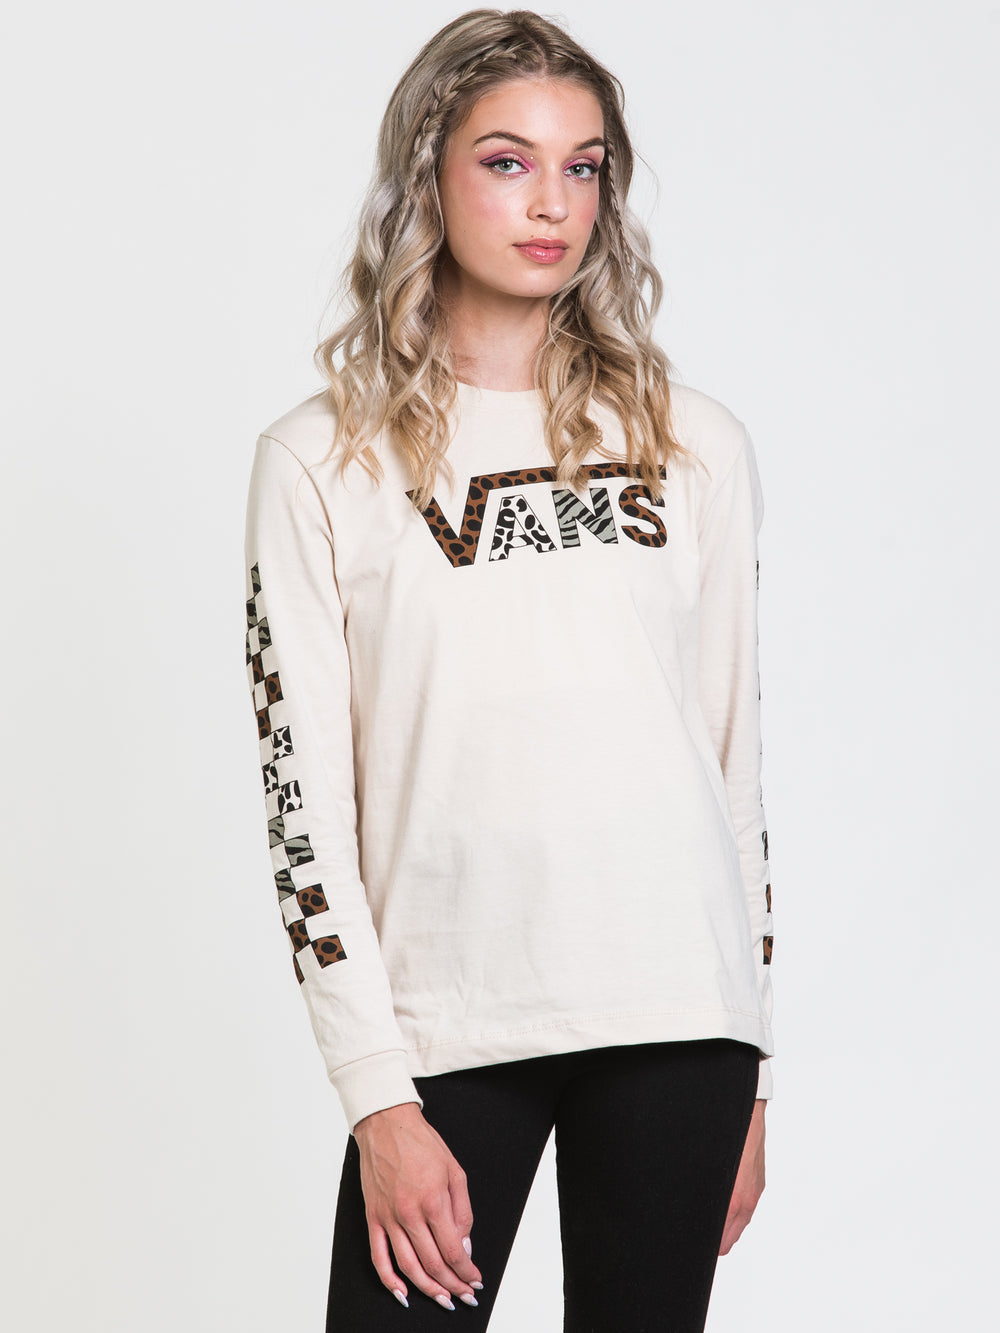 VANS YODELZ LONG SLEEVE GRAPHIC TEE  - CLEARANCE